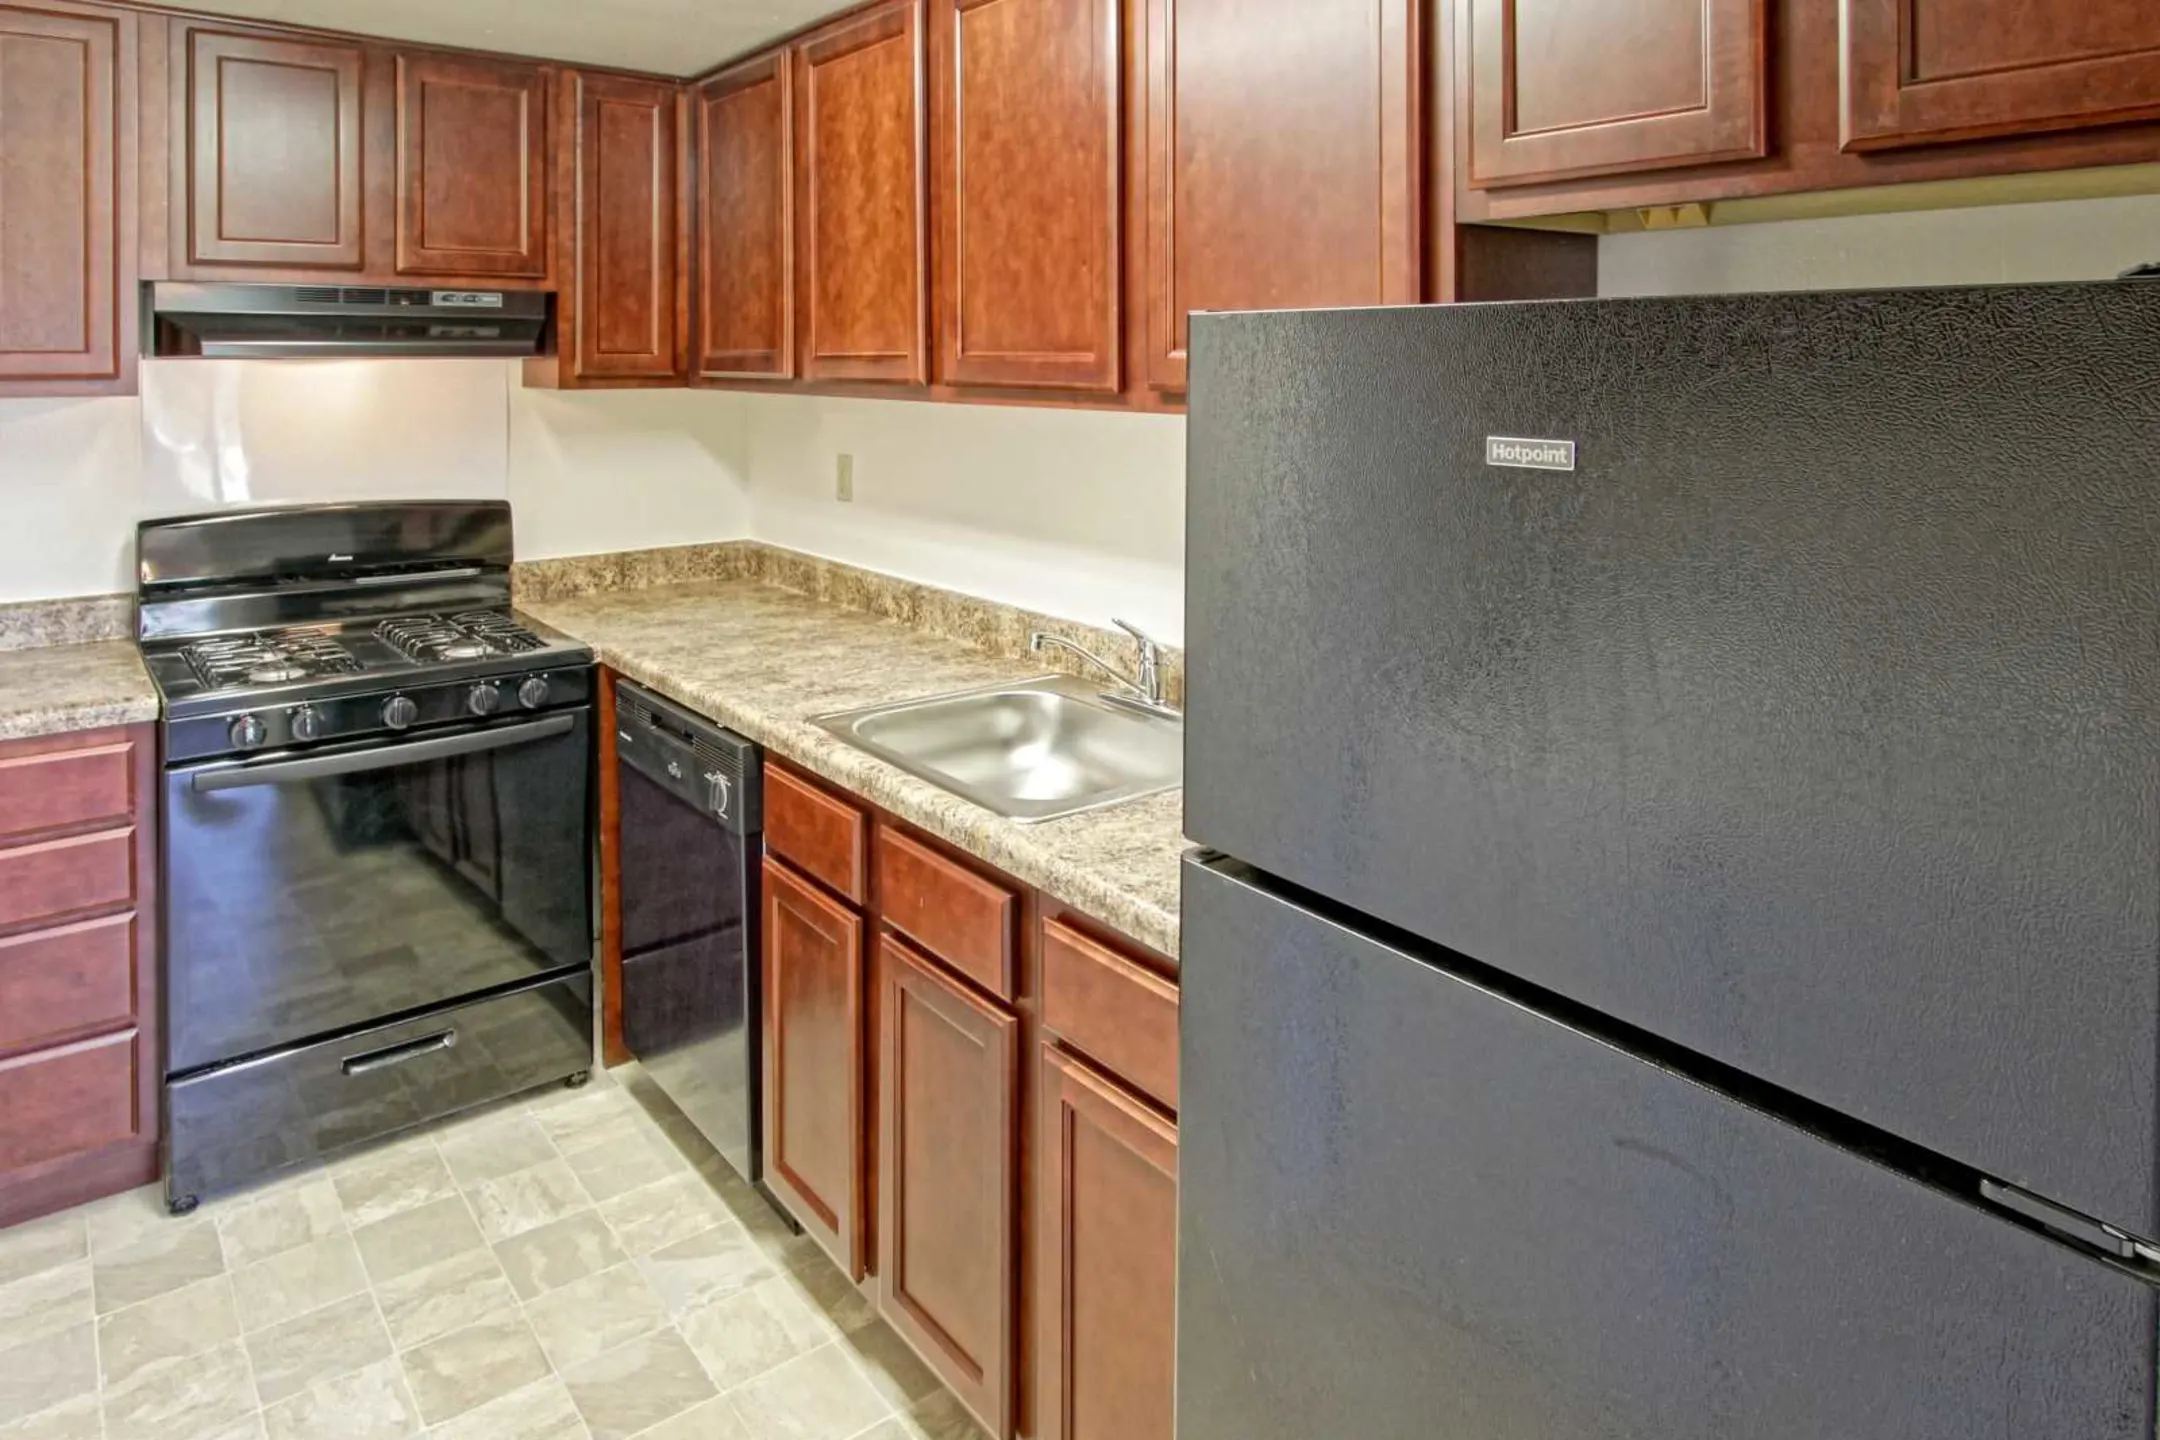 Kitchen - Pennswood Apartments & Townhomes - Harrisburg, PA